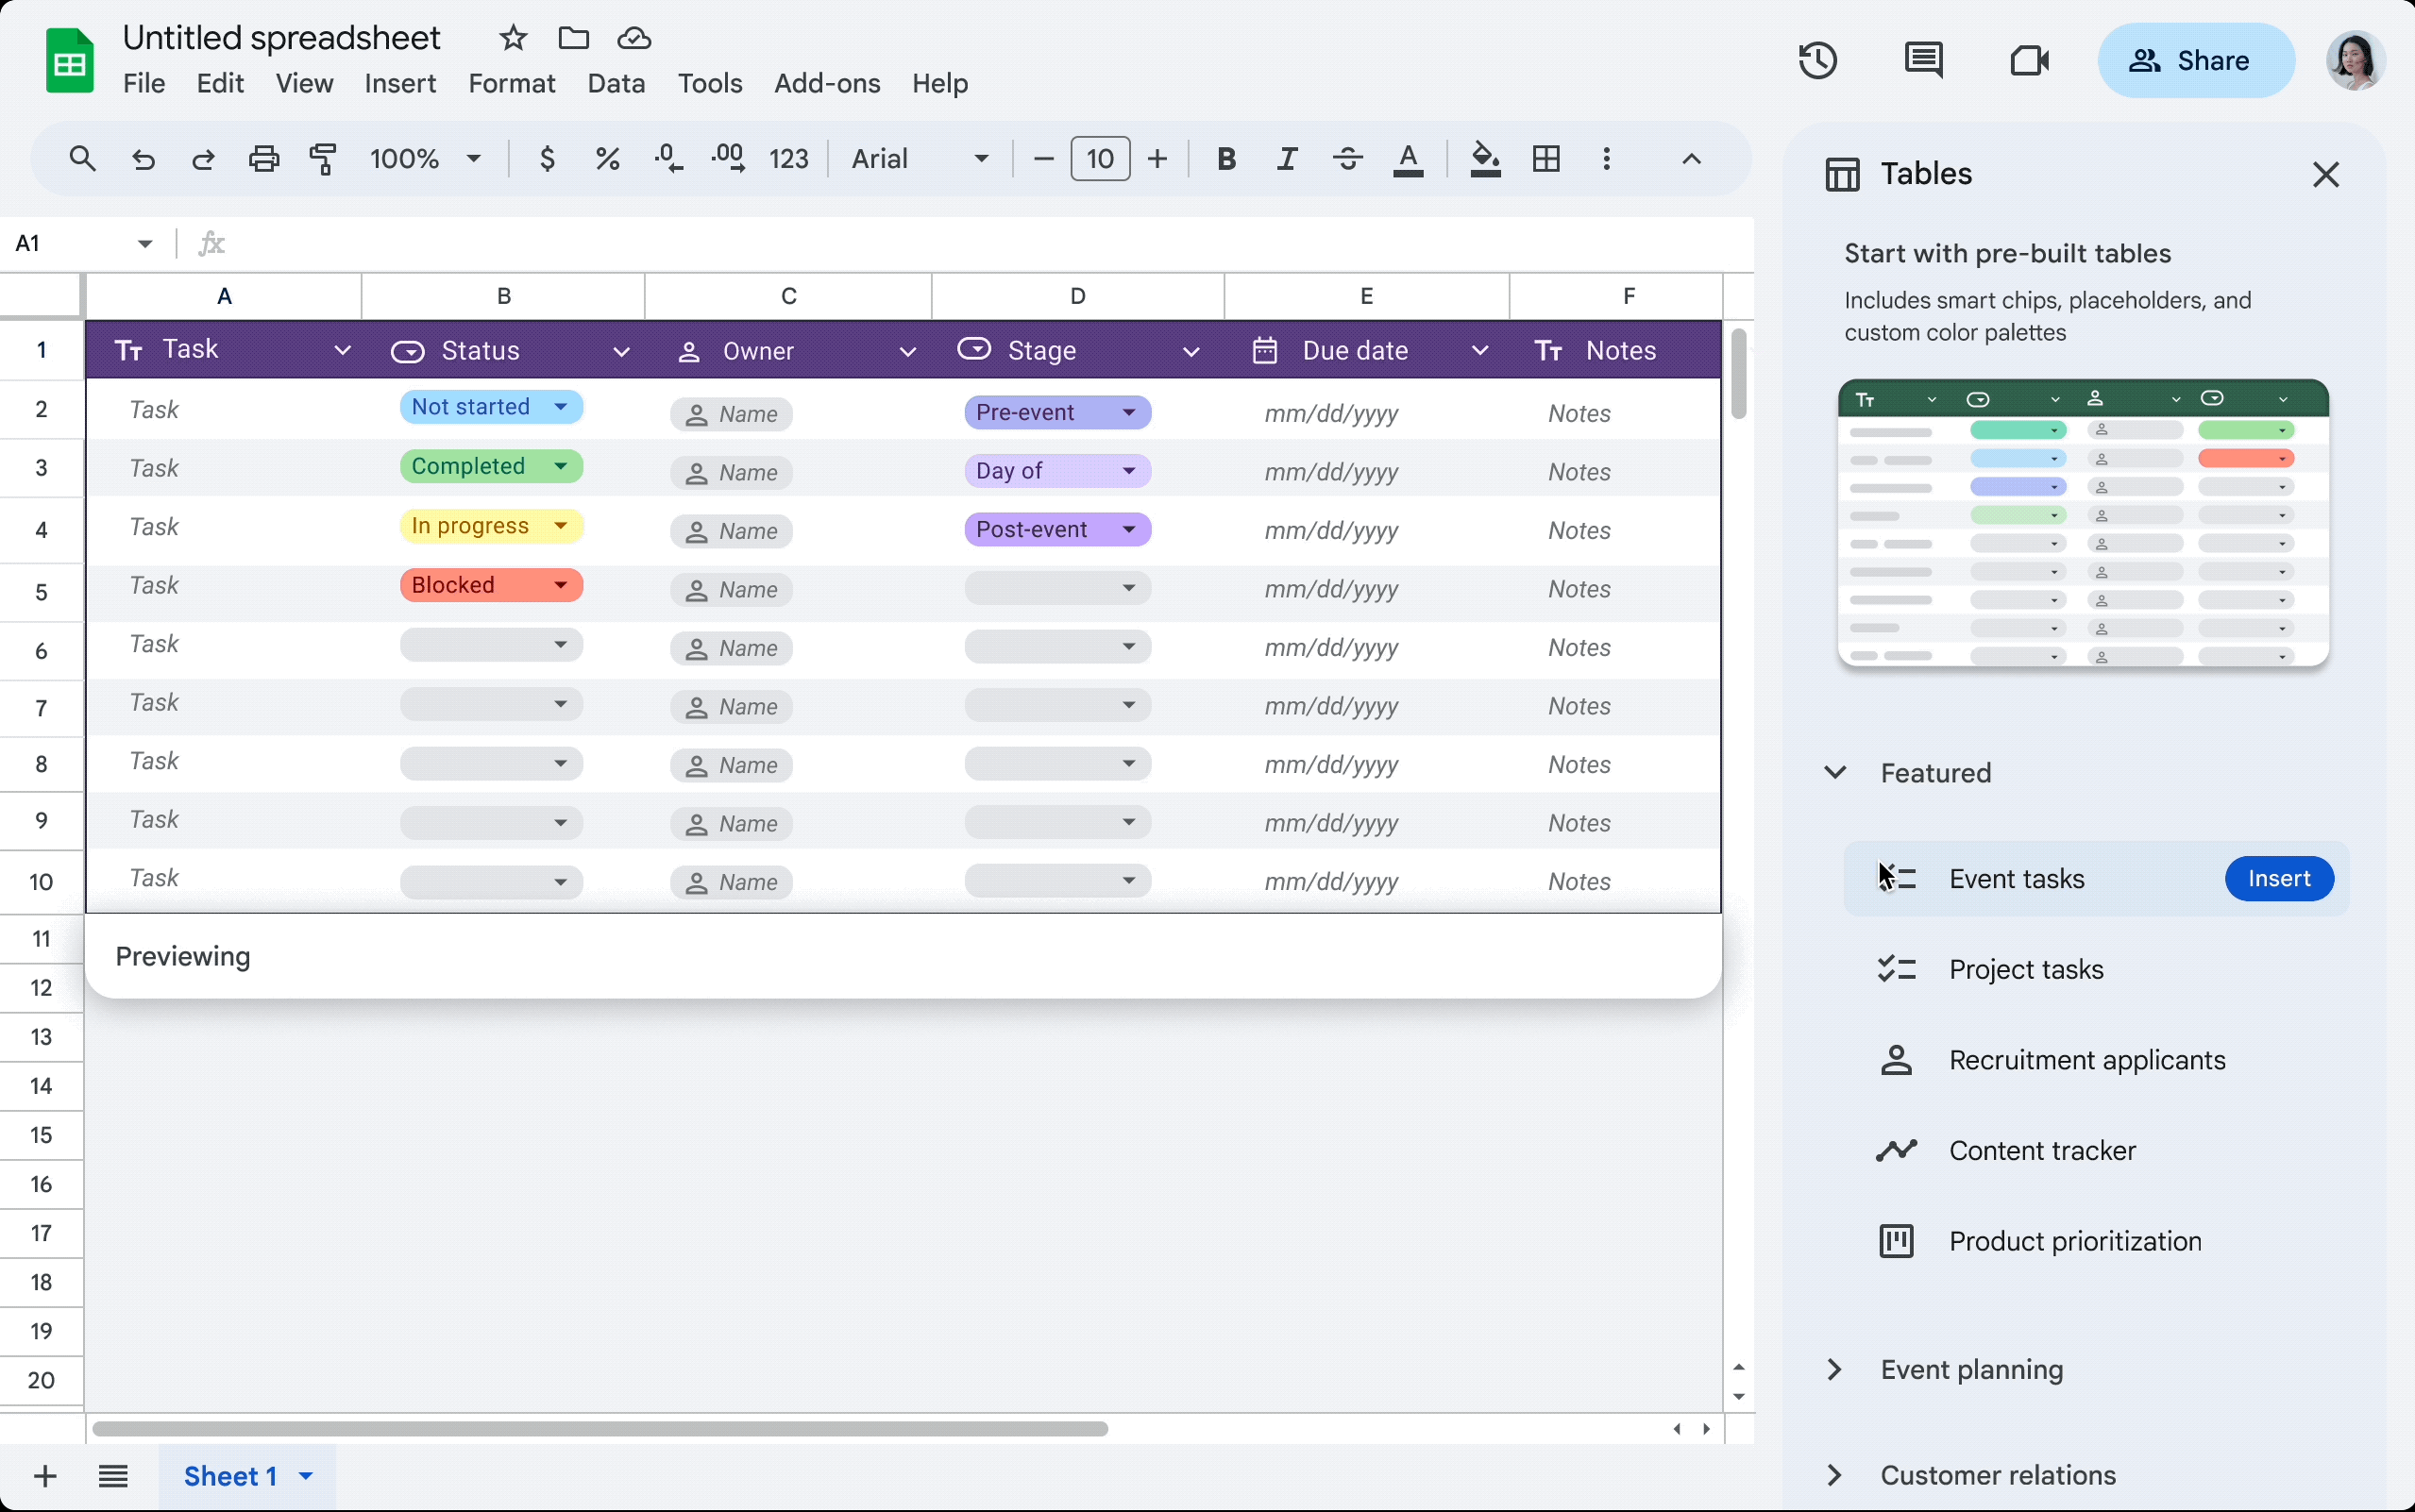 Pre-built tables in Sheets